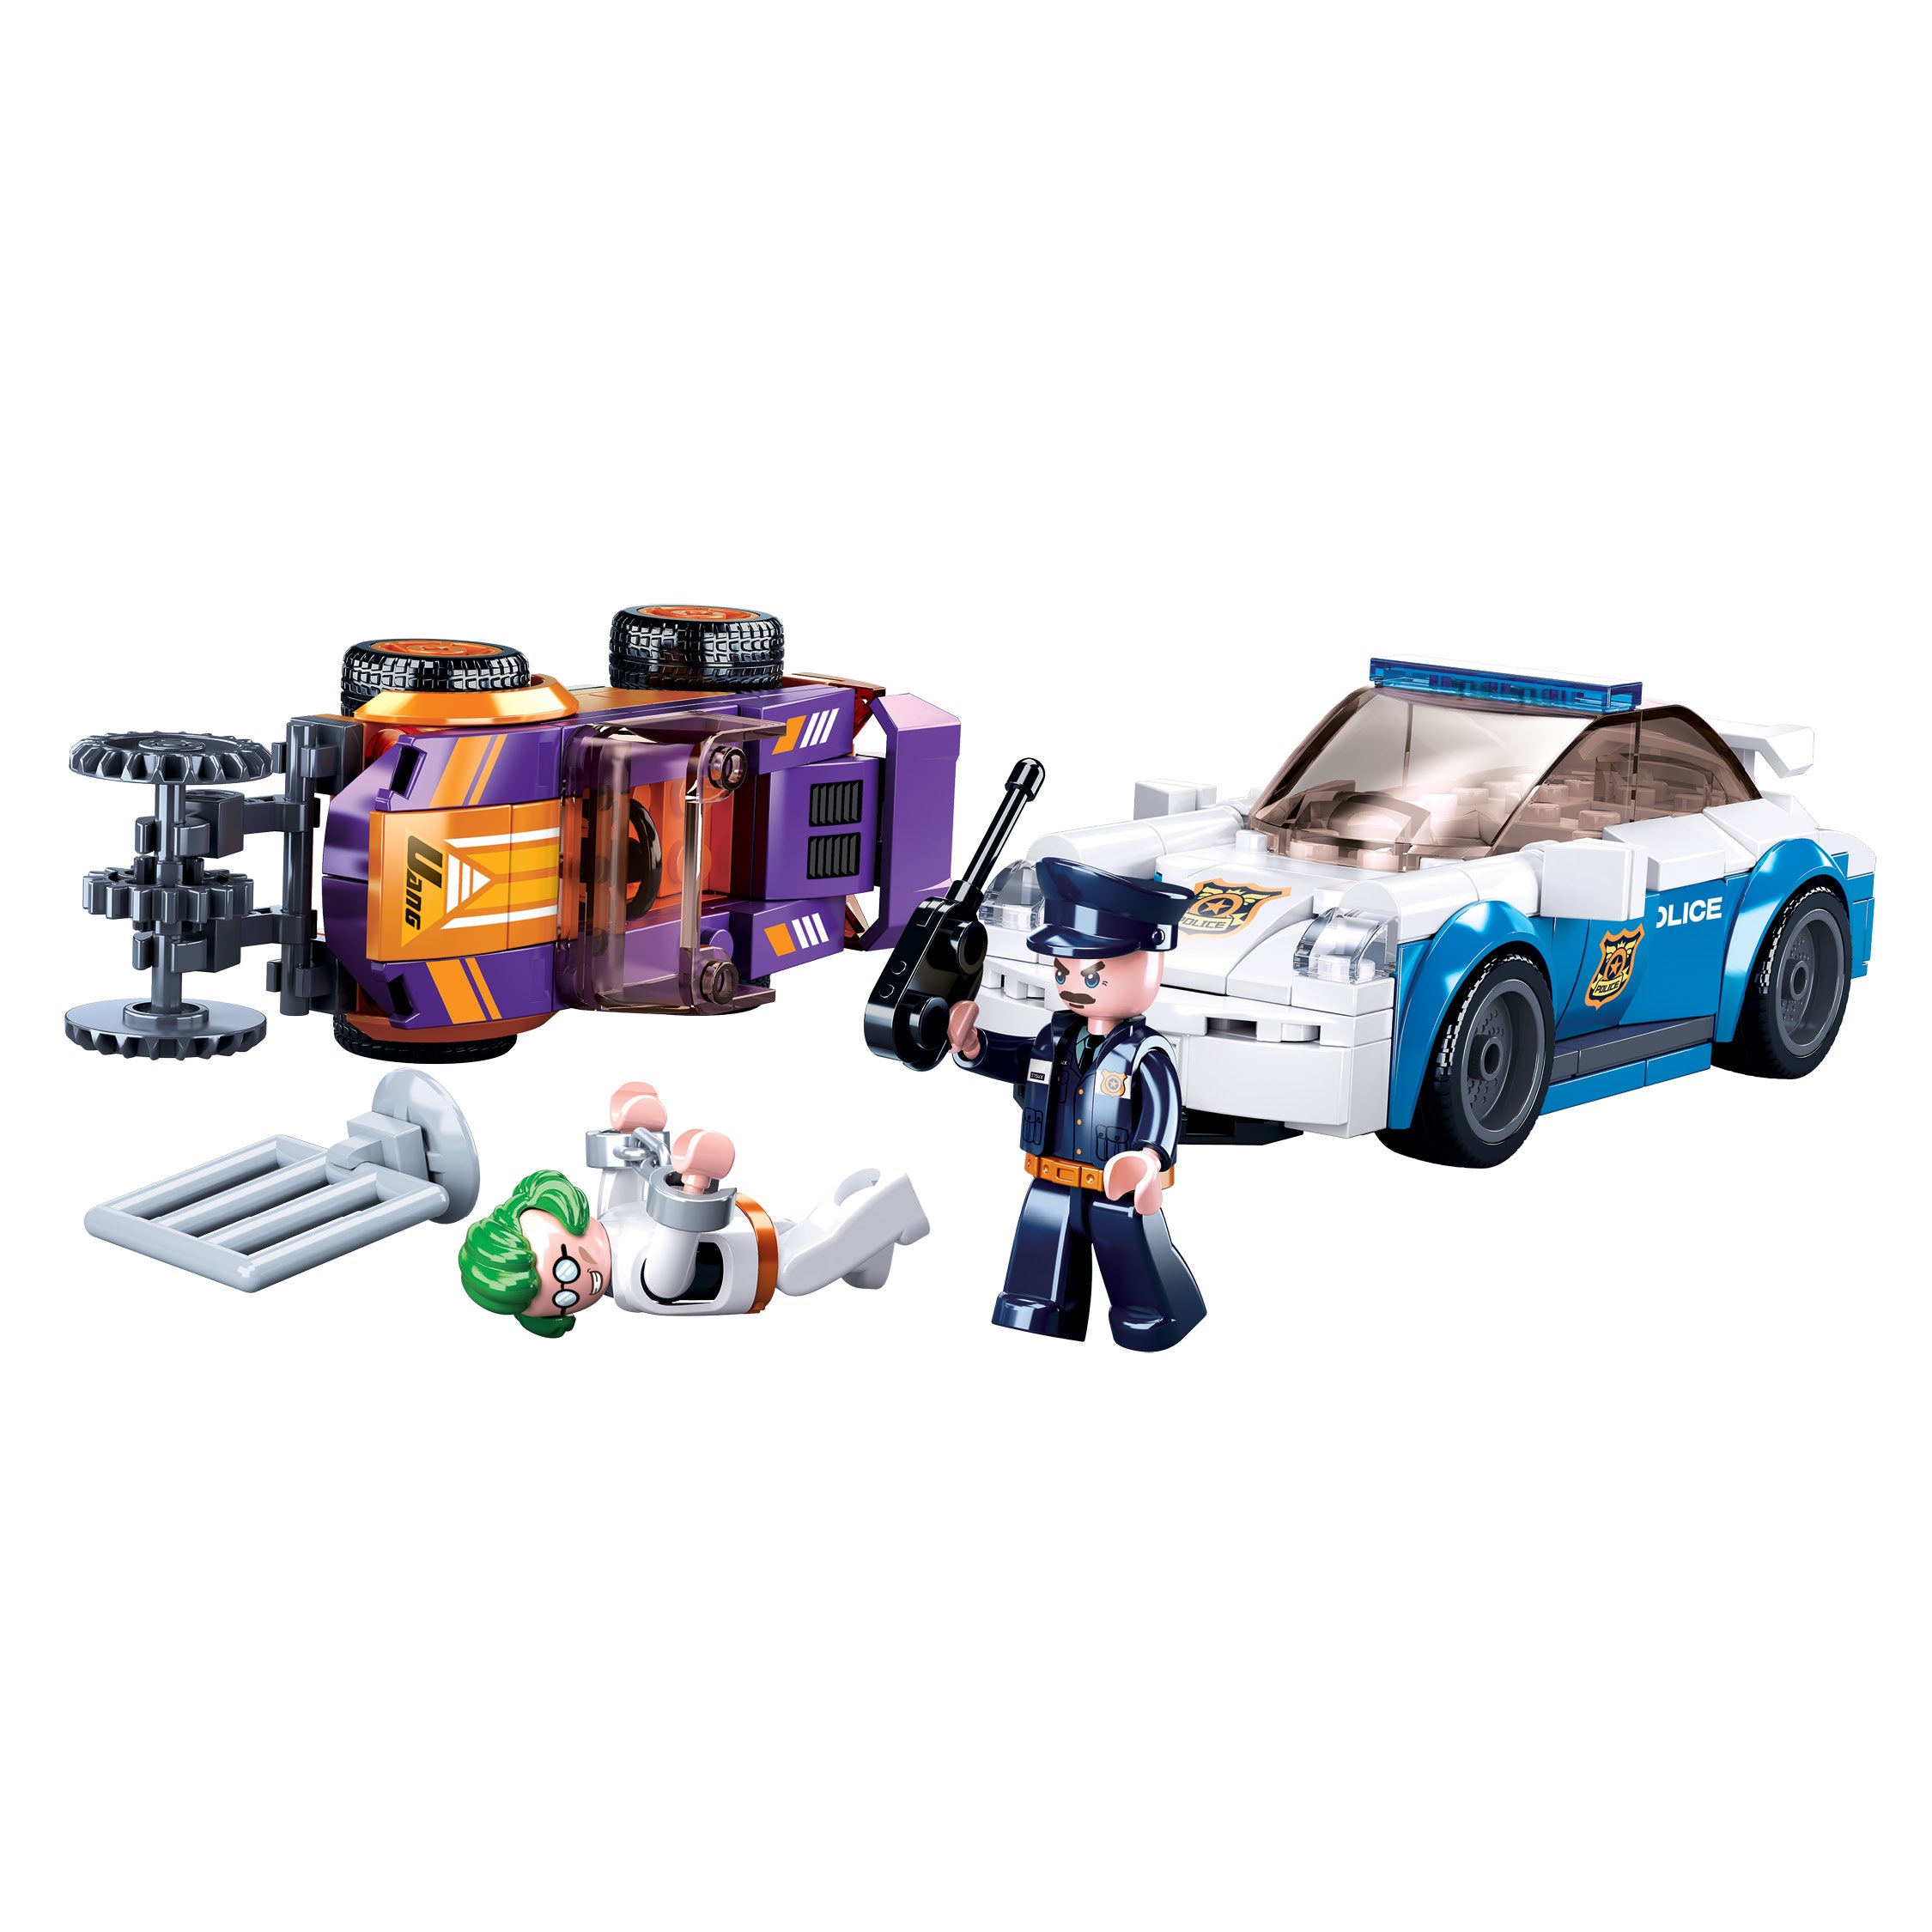 Sluban® Police – Manhunt On Highway (M38-B0825) ( 264 Pieces) Building Blocks Kit For Boys And Girls Aged 8 Years And Above  Creative Construction Set Educational Stem Toy Blocks Compatible With Other Leading Brands, Bis Certified.